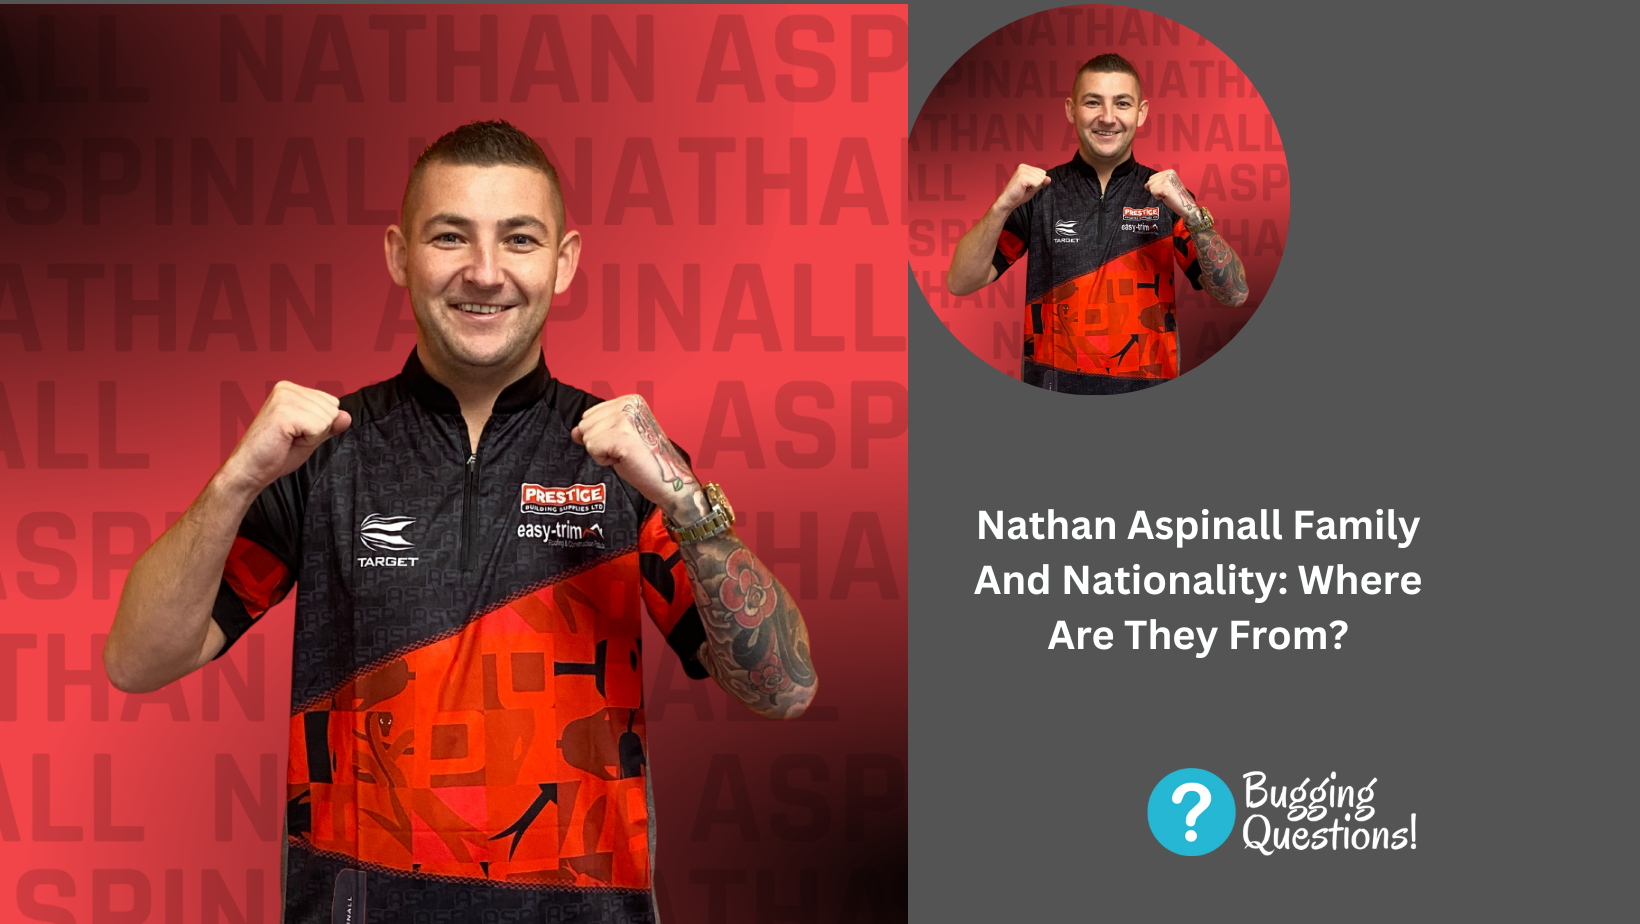 Nathan Aspinall Family And Nationality: Where Are They From?